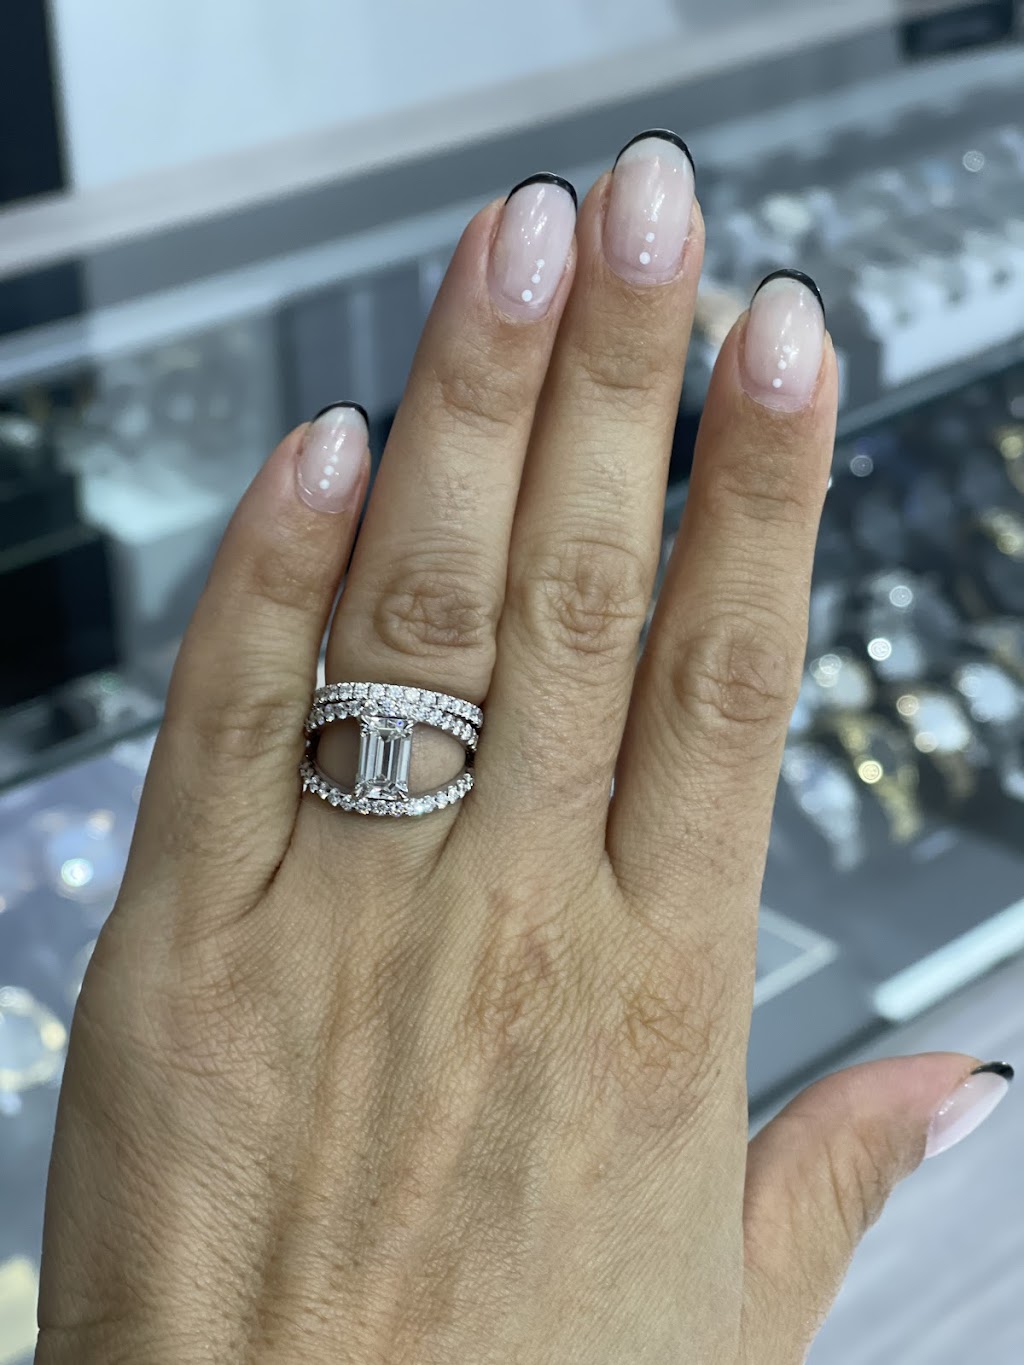 Michael & Co. Jewelers | At The Westchester Mall 125 Westchester Ave Inside The Westchester Mall, White Plains, NY 10601 | Phone: (914) 761-1787